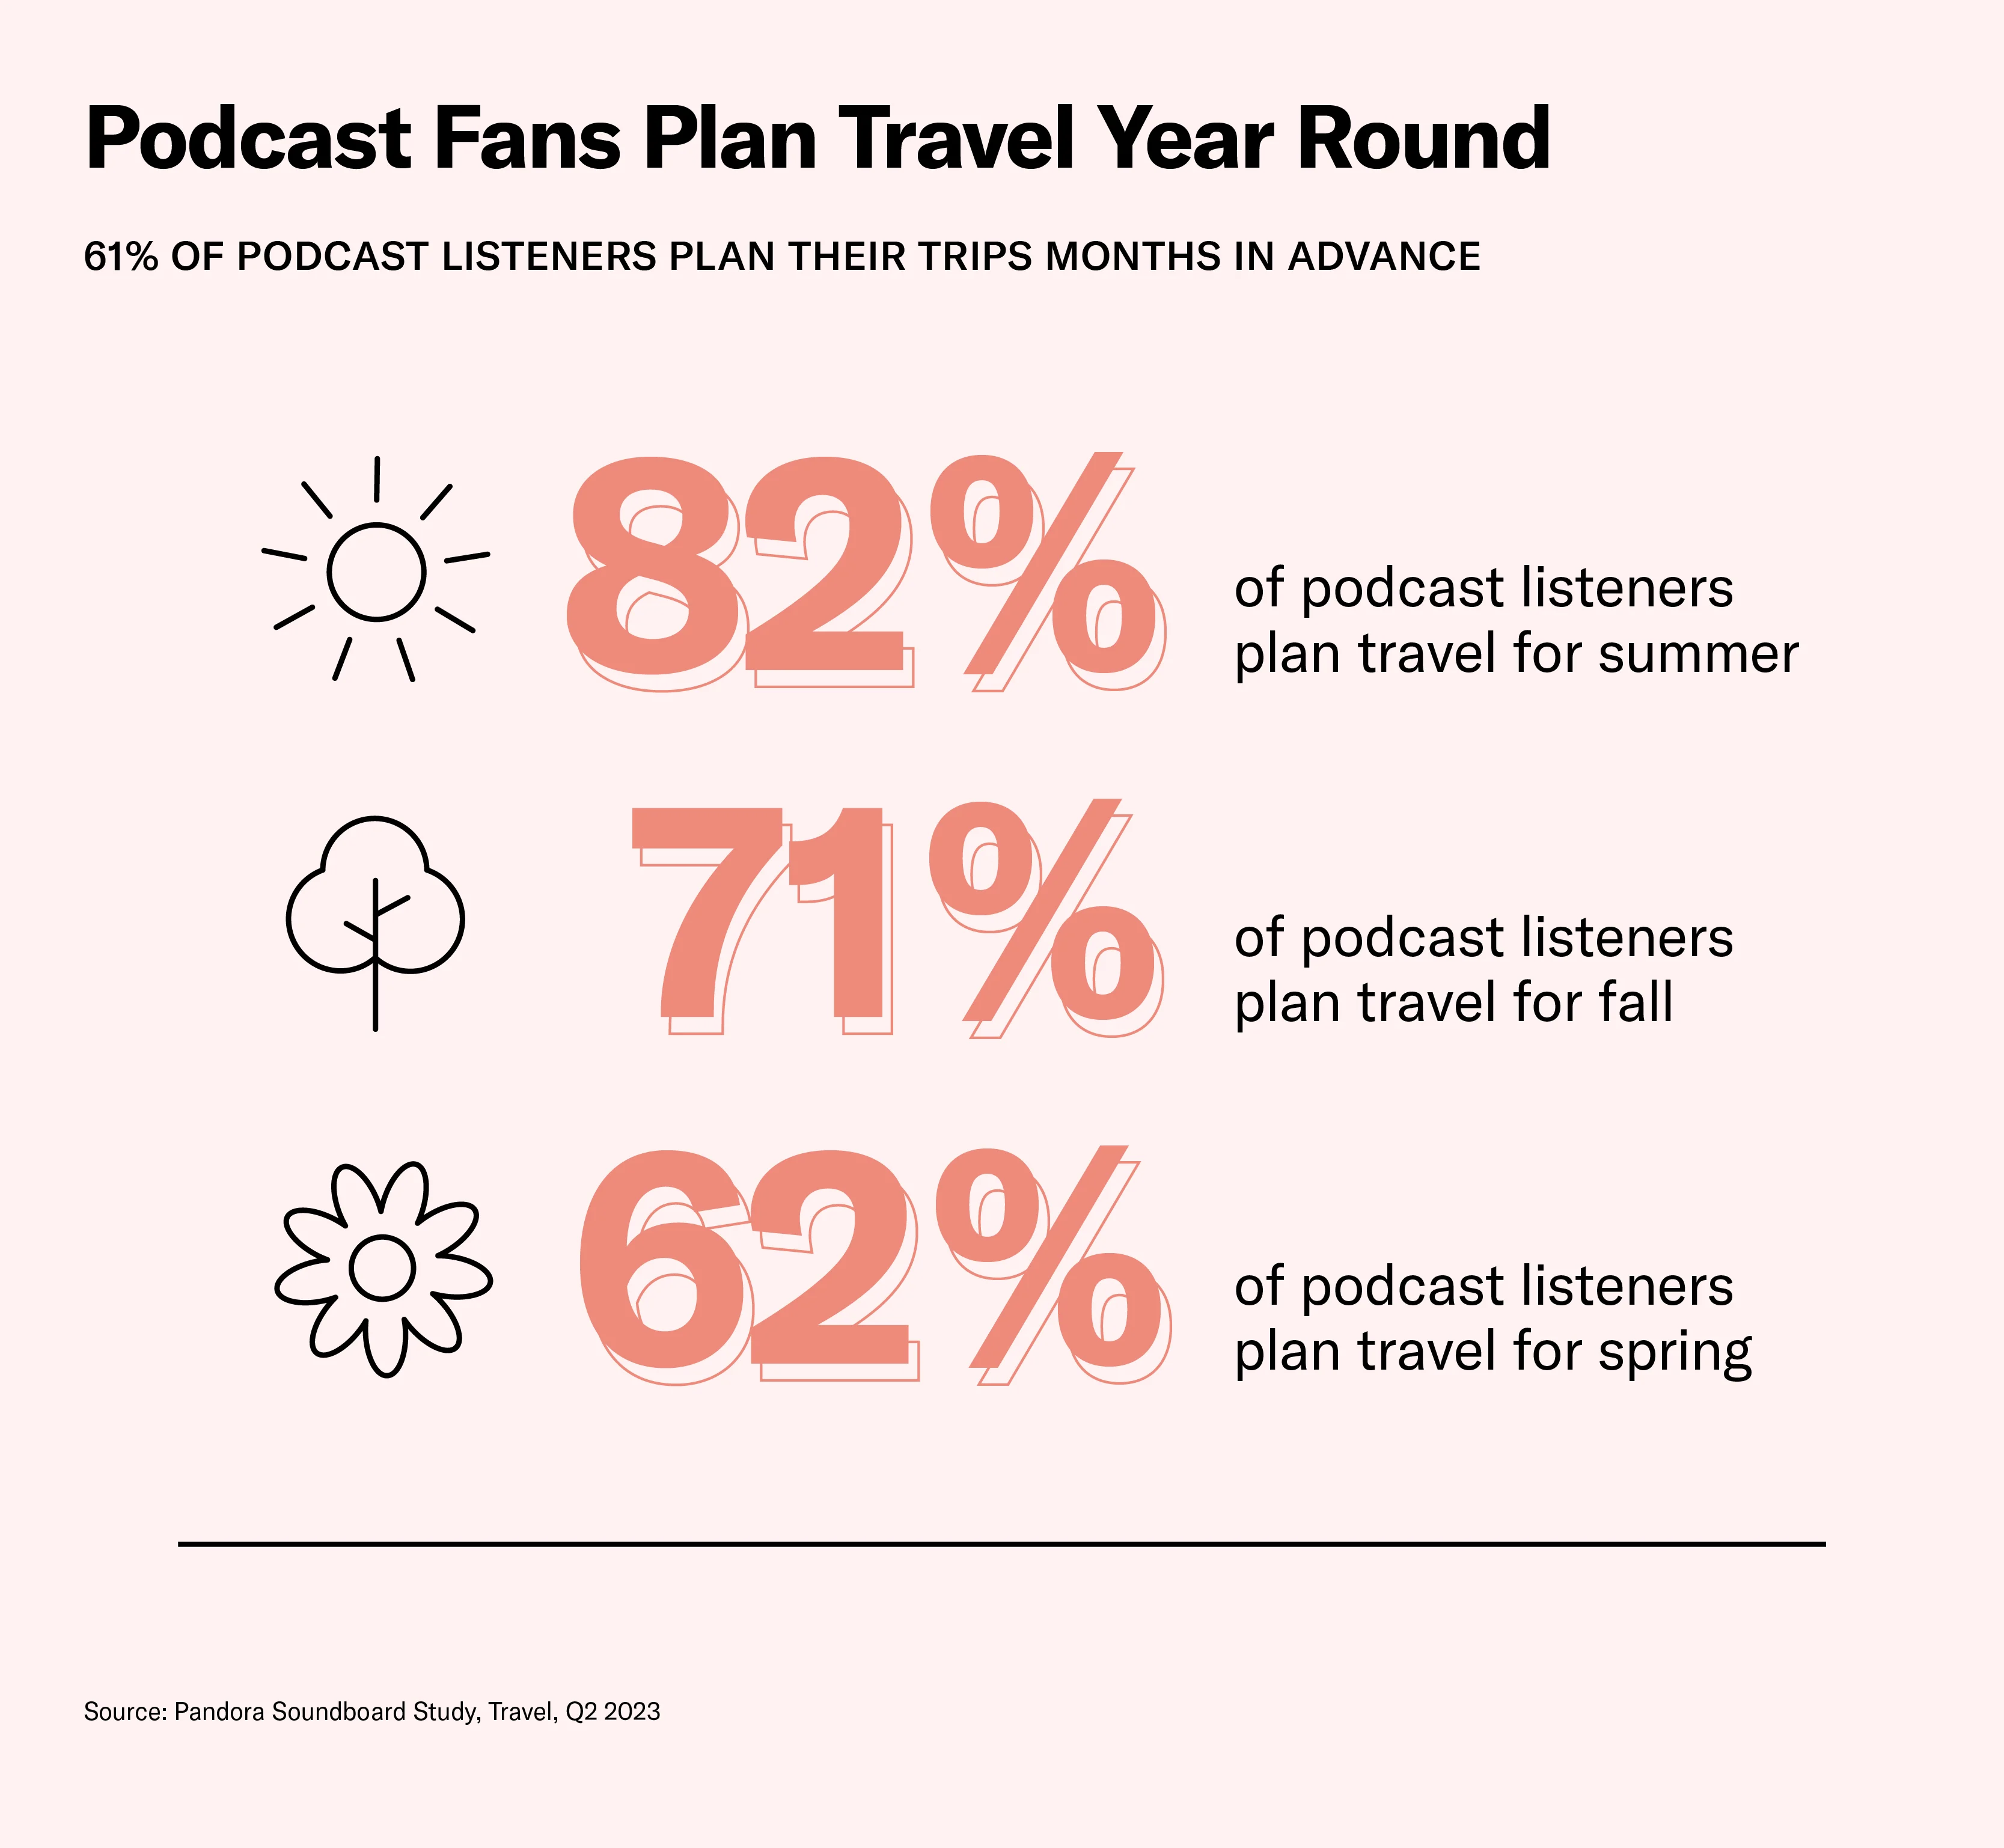 Podcast fans plan travel all year